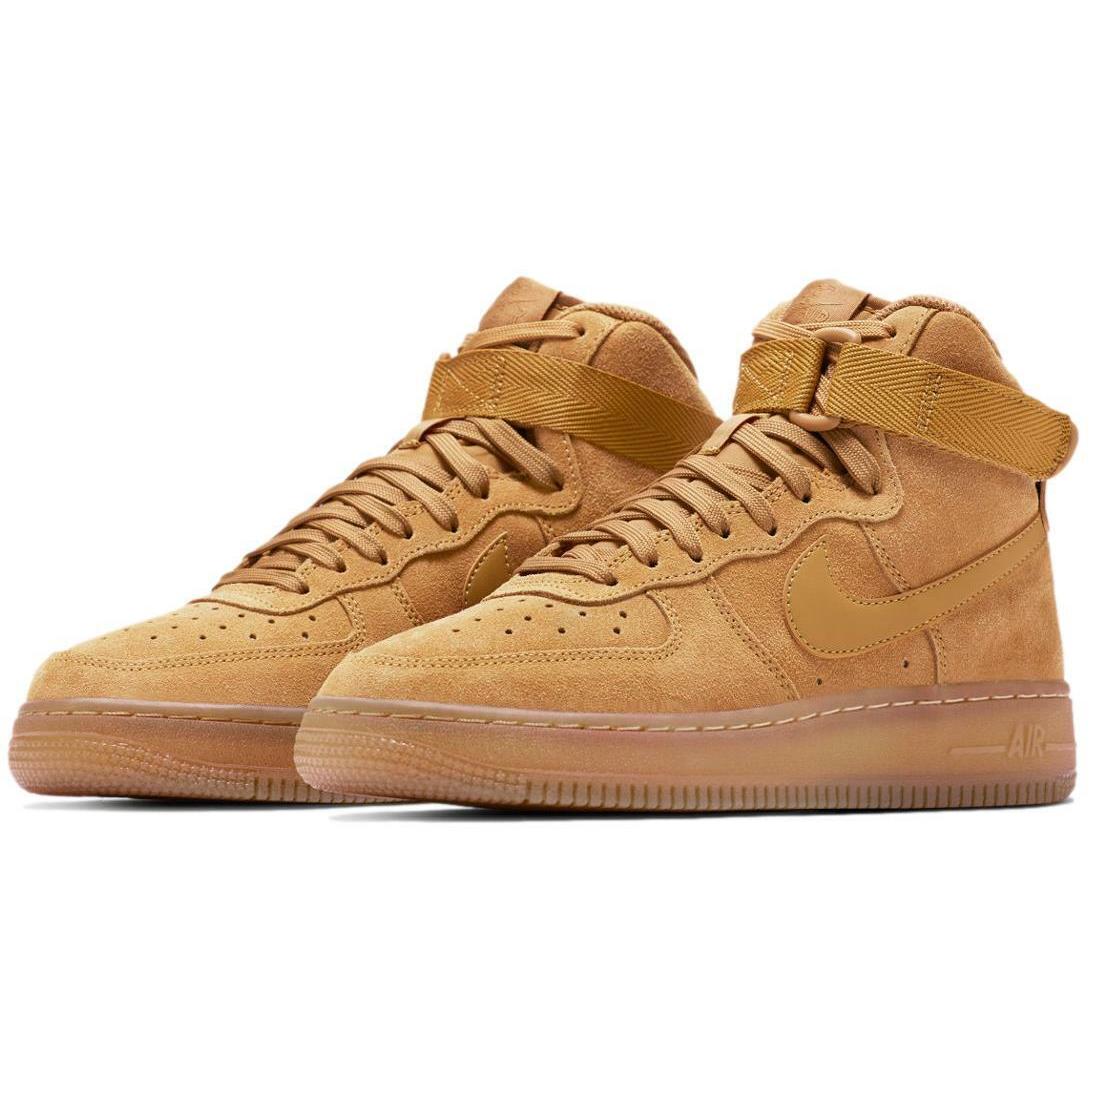 Nike Air Force 1 High LV8 3 GS `wheat` Youth Shoes Sneakers CK0262-700